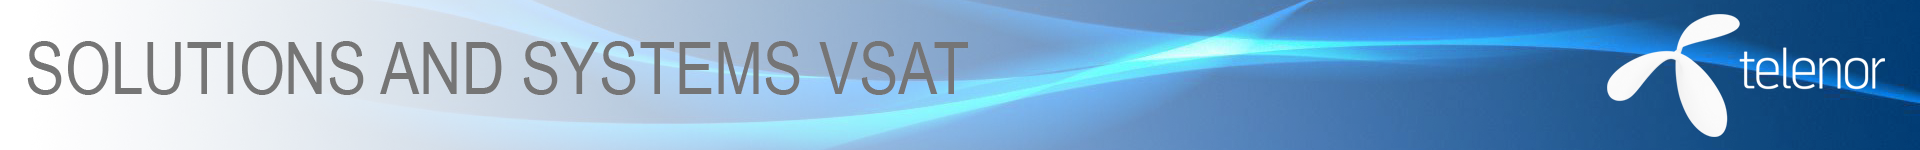 SOLUTIONS AND SYSTEMS VSAT